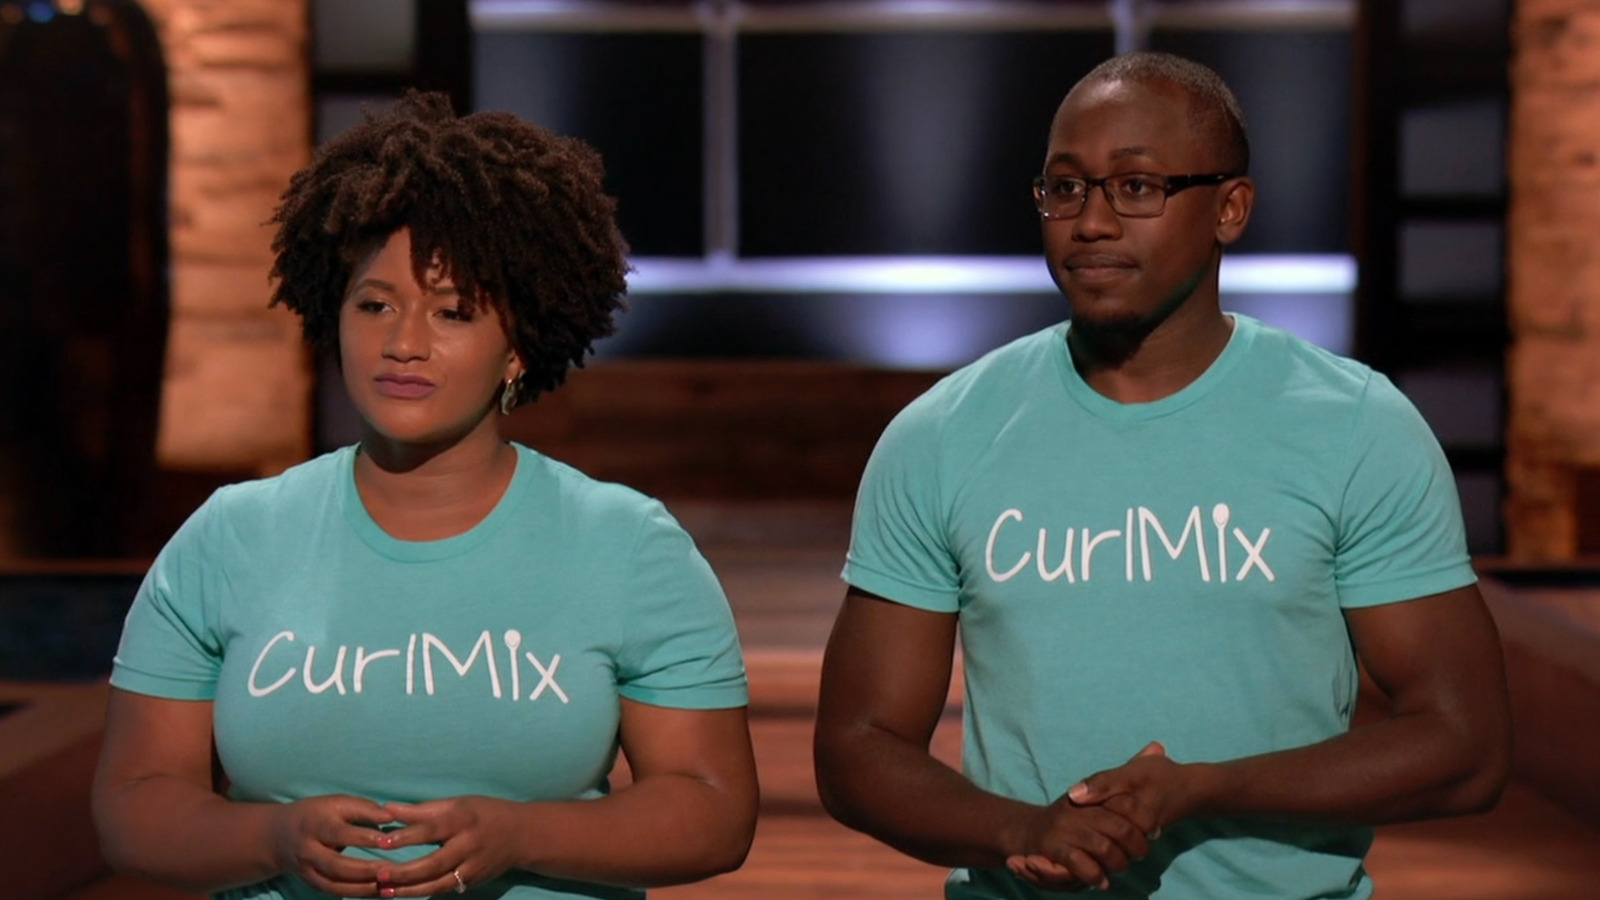 Whatever Happened To CurlMix After Shark Tank?